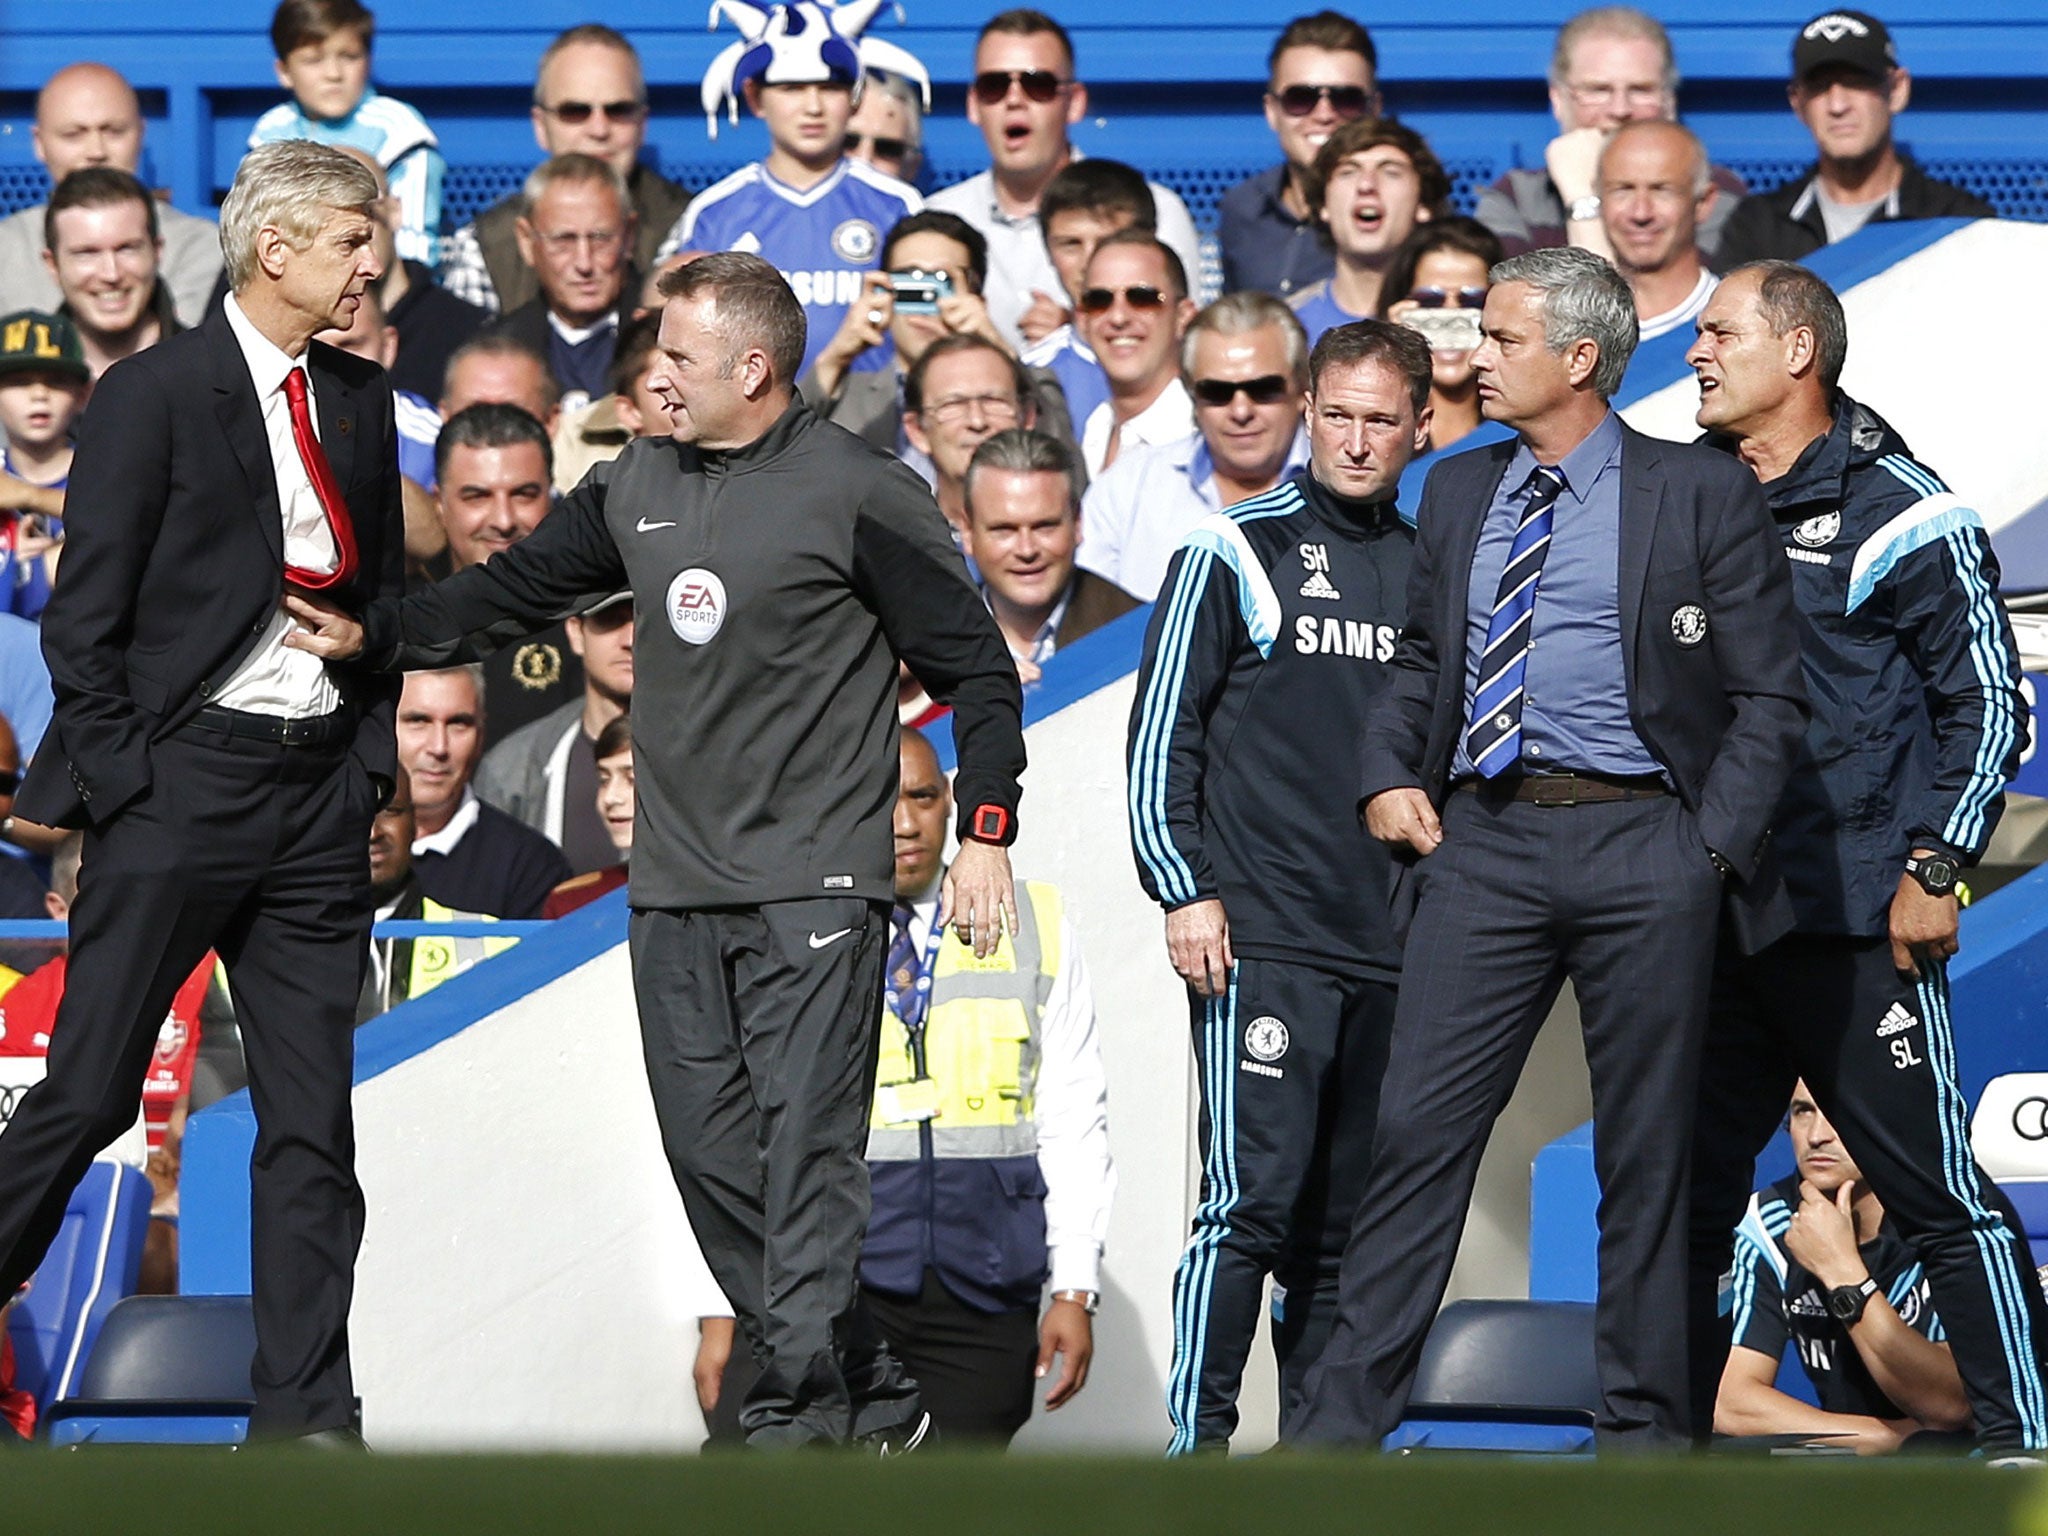 Arsenal and Chelsea's rivalry was emboldened during the Wenger vs Mourinho days